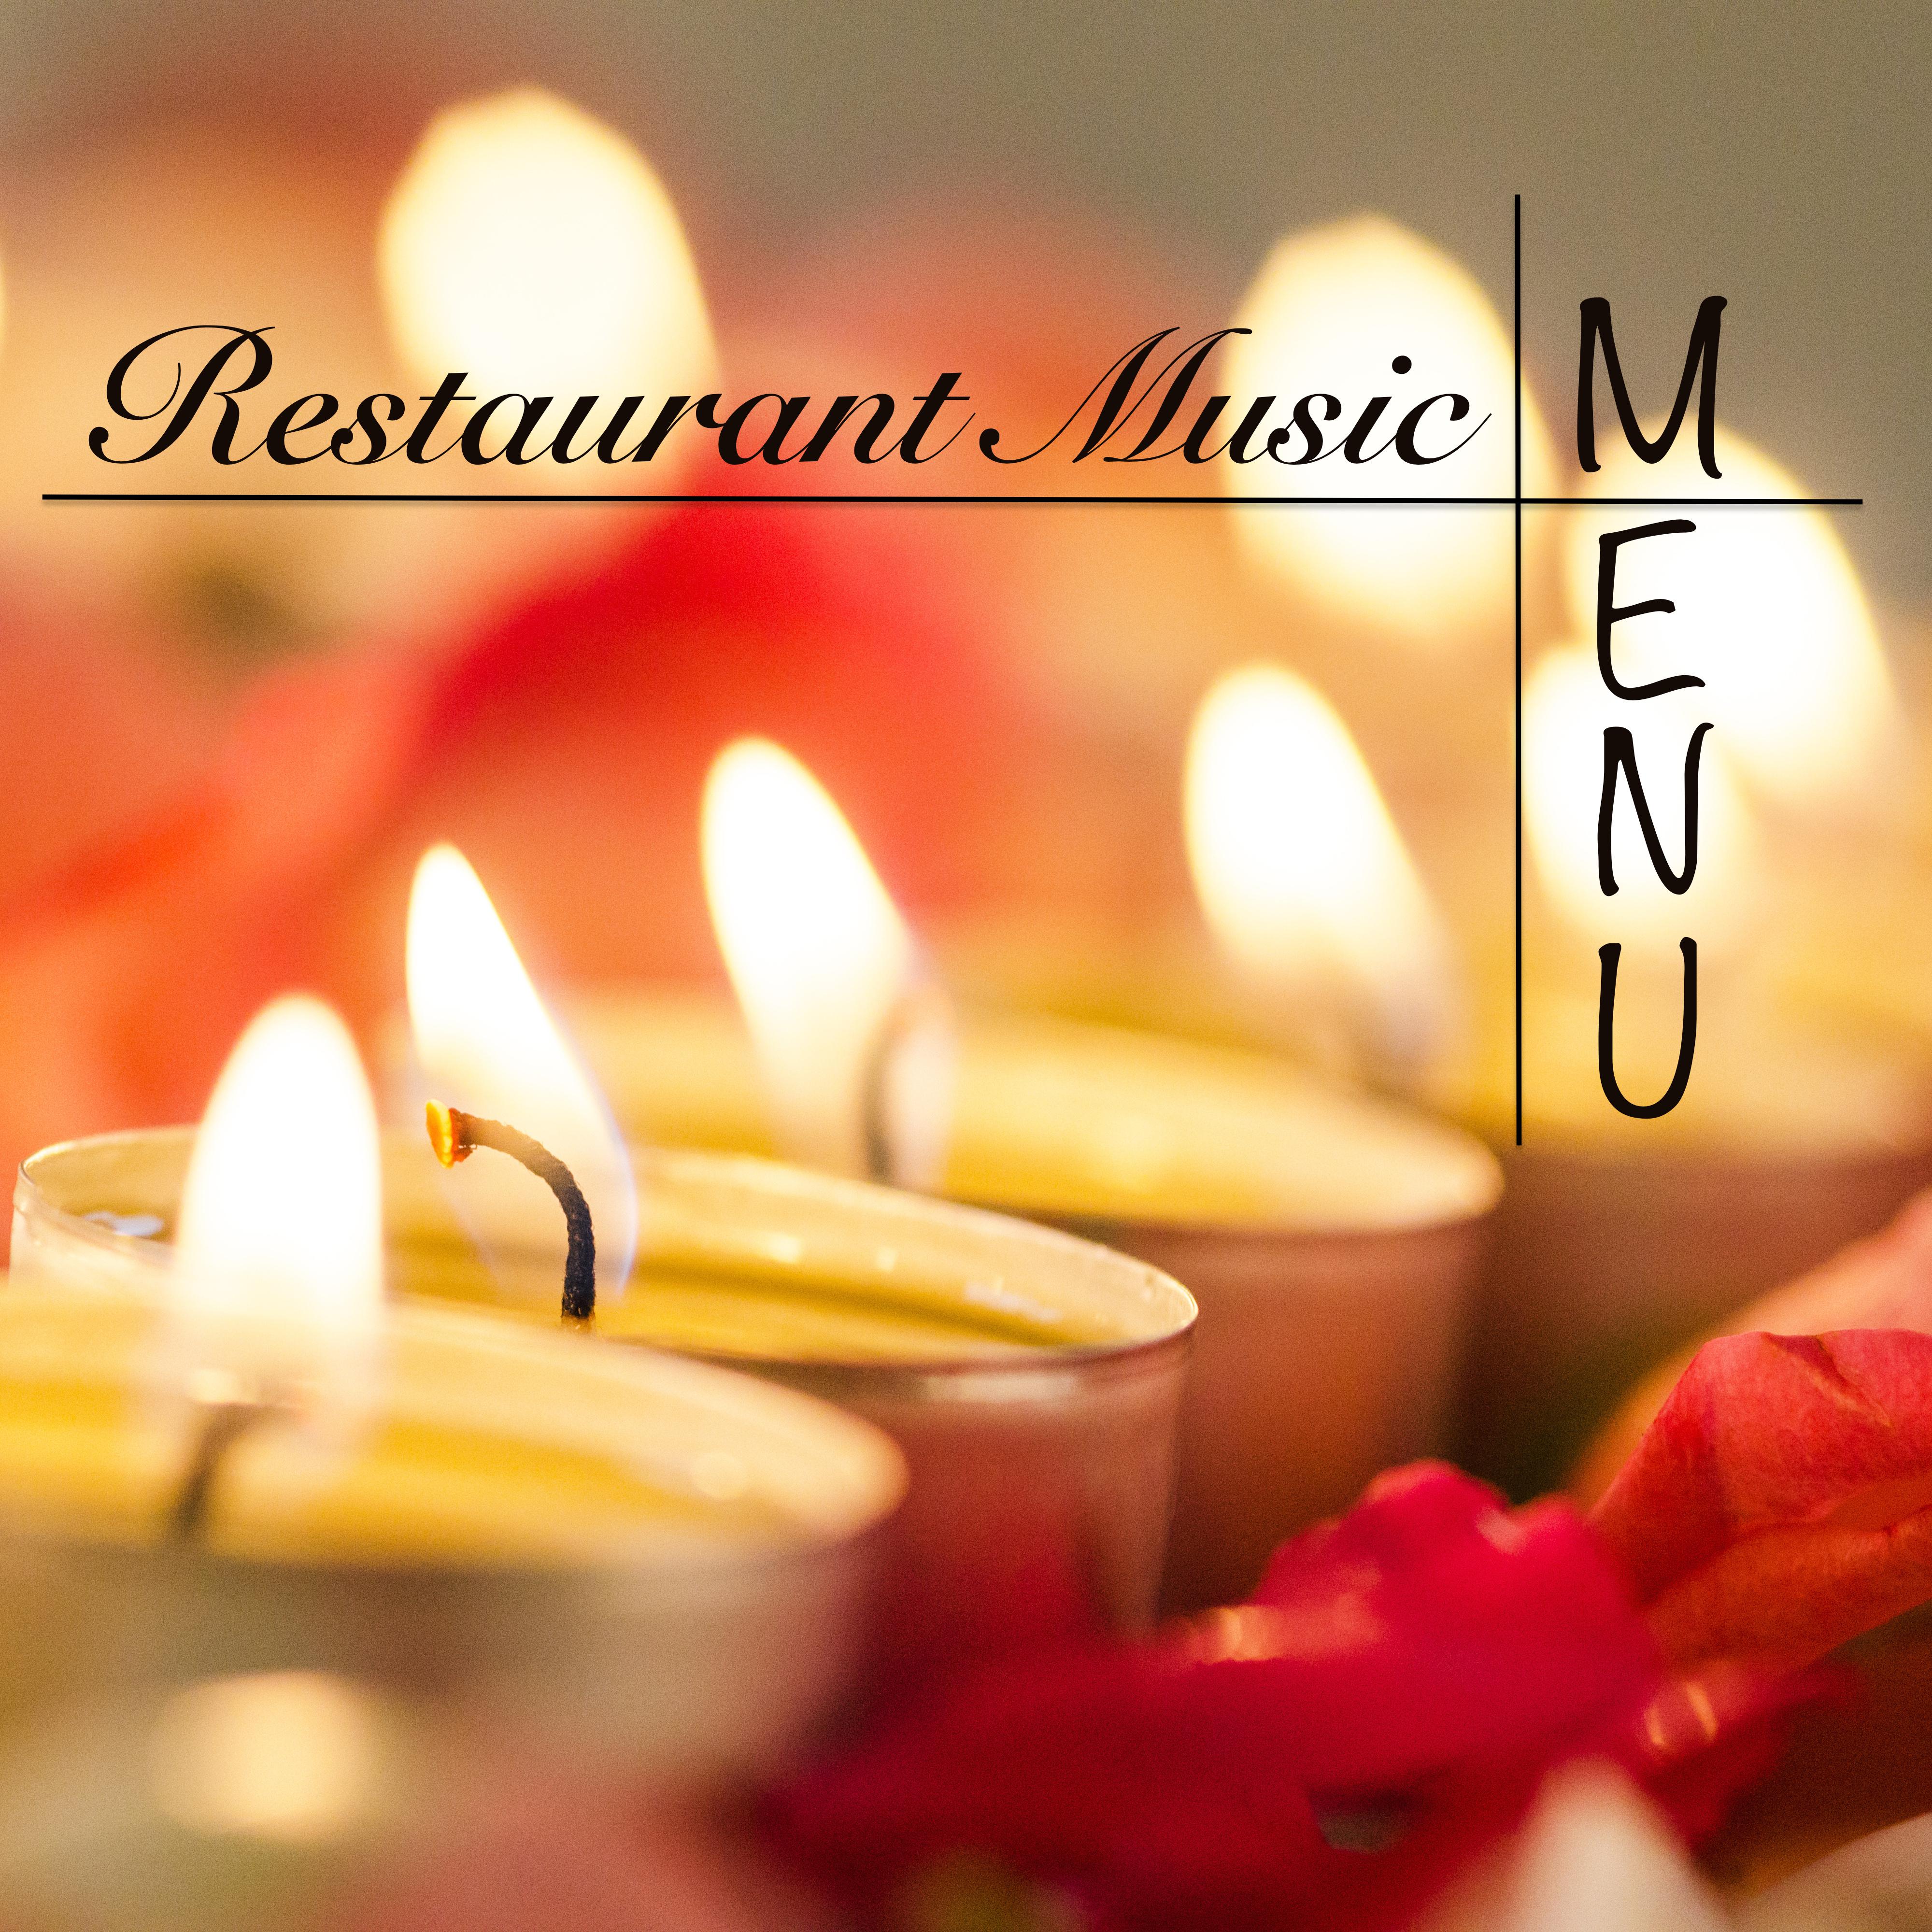 Restaurant Music Menu - Bossa Nova, Smooth Jazz Lounge and Ambient Music (Gold Collection)